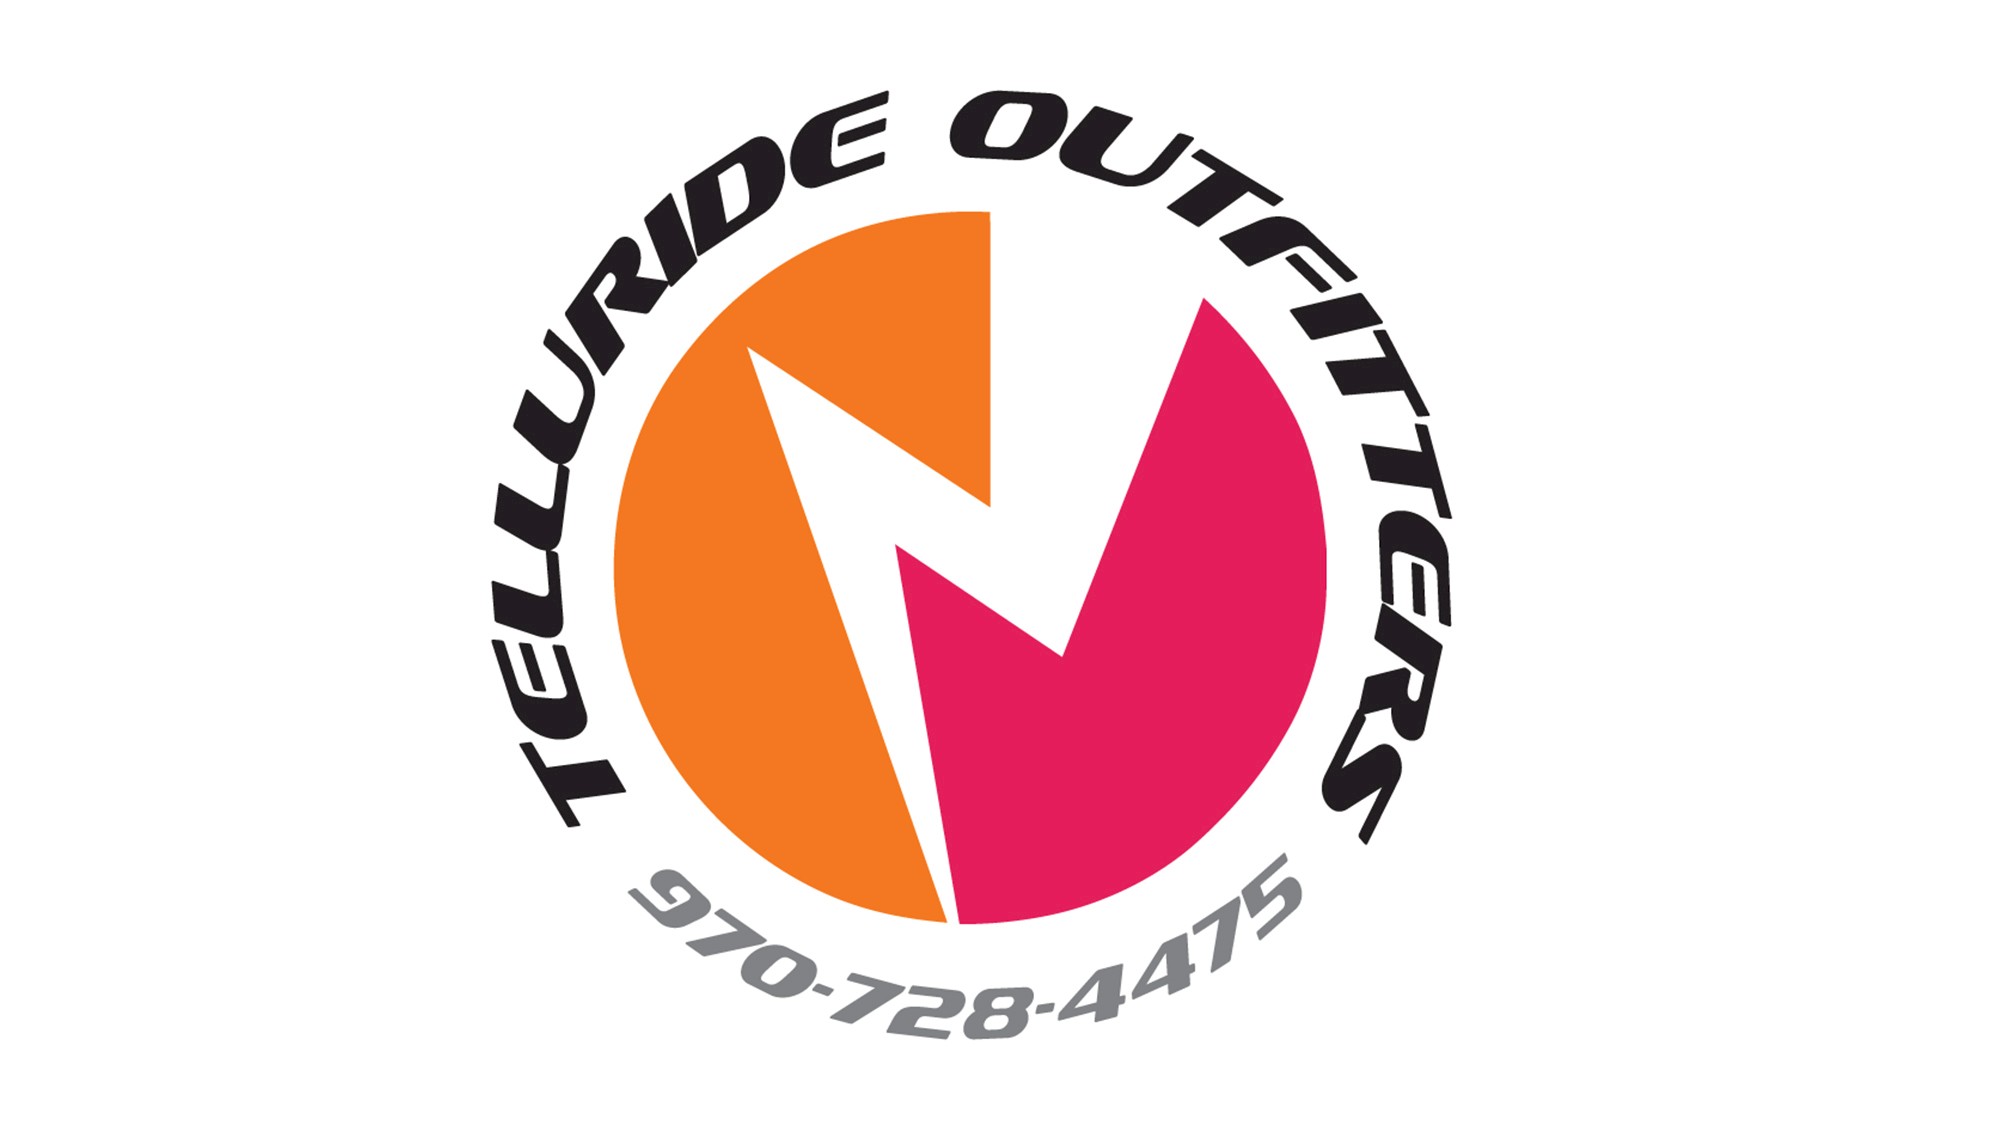 Telluride Outfitters